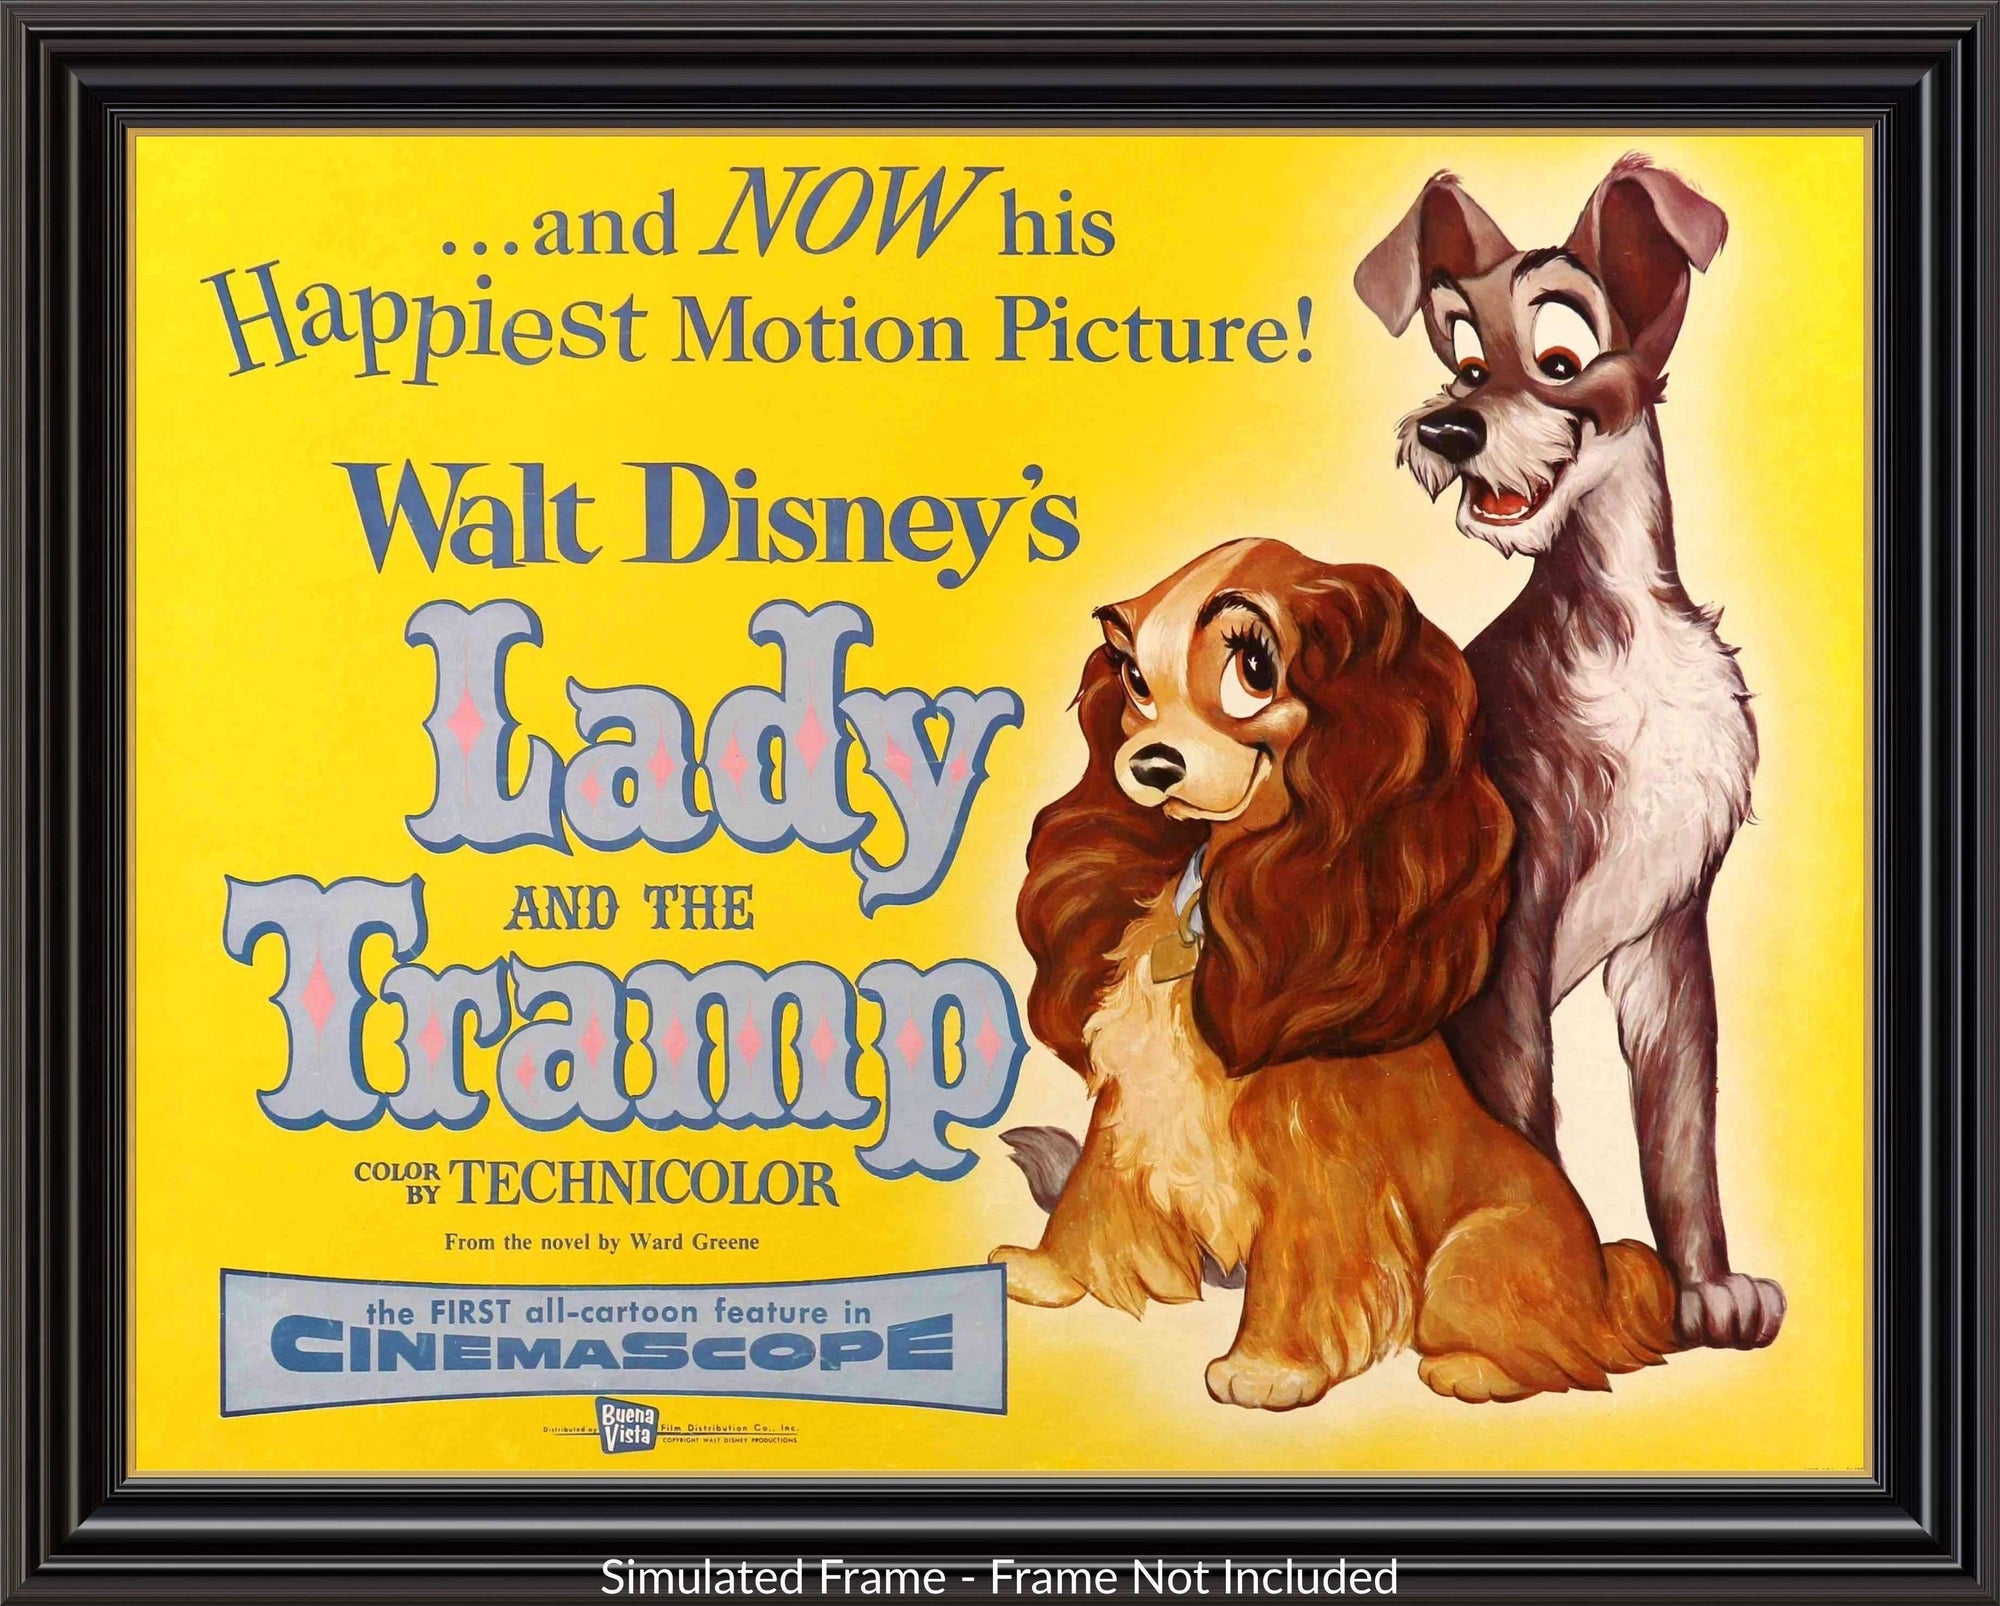 Lady and the Tramp Movie Review (1955)